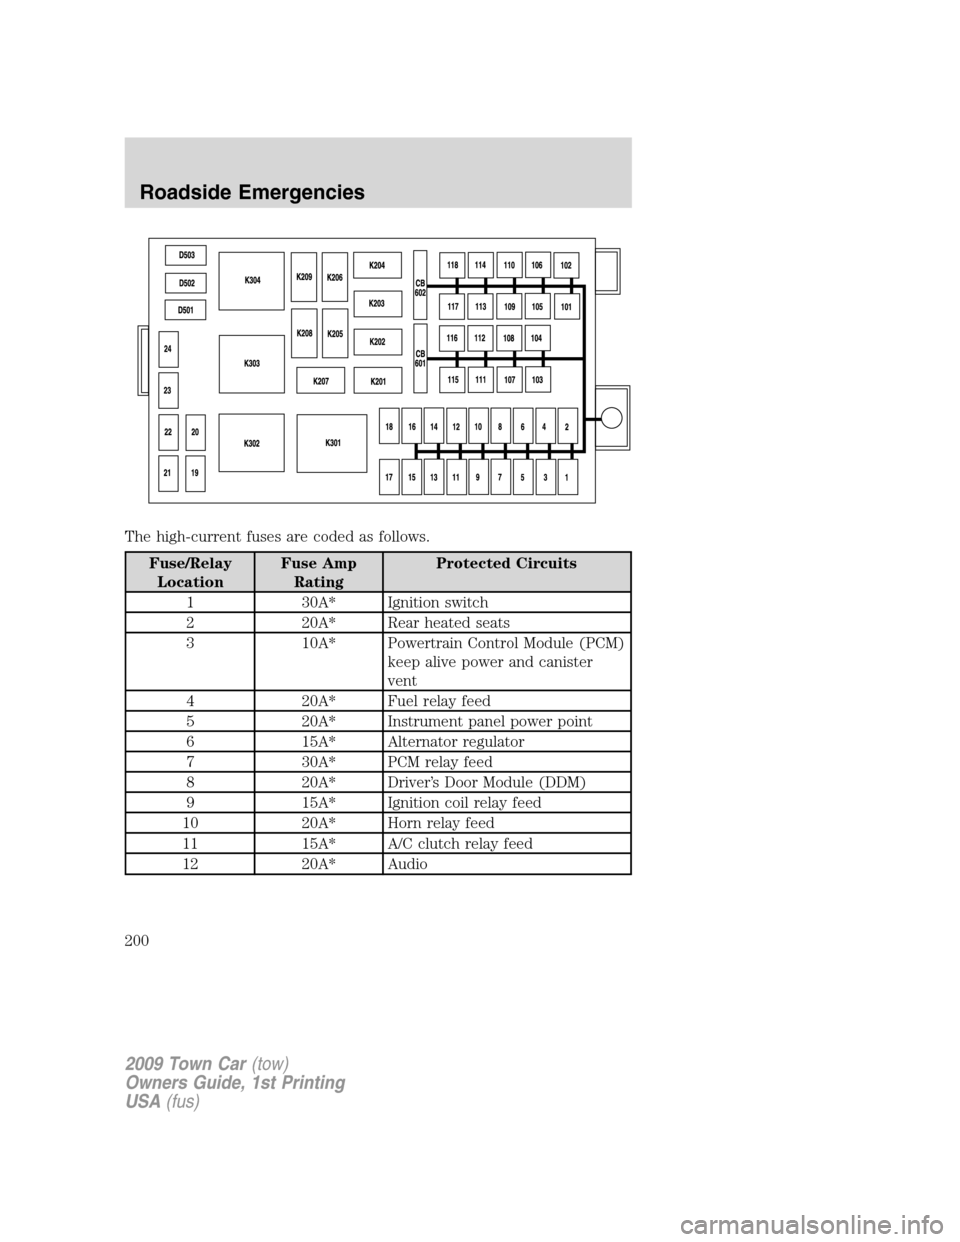 LINCOLN TOWN CAR 2009  Owners Manual The high-current fuses are coded as follows.
Fuse/Relay
LocationFuse Amp
RatingProtected Circuits
1 30A* Ignition switch
2 20A* Rear heated seats
3 10A* Powertrain Control Module (PCM)
keep alive powe